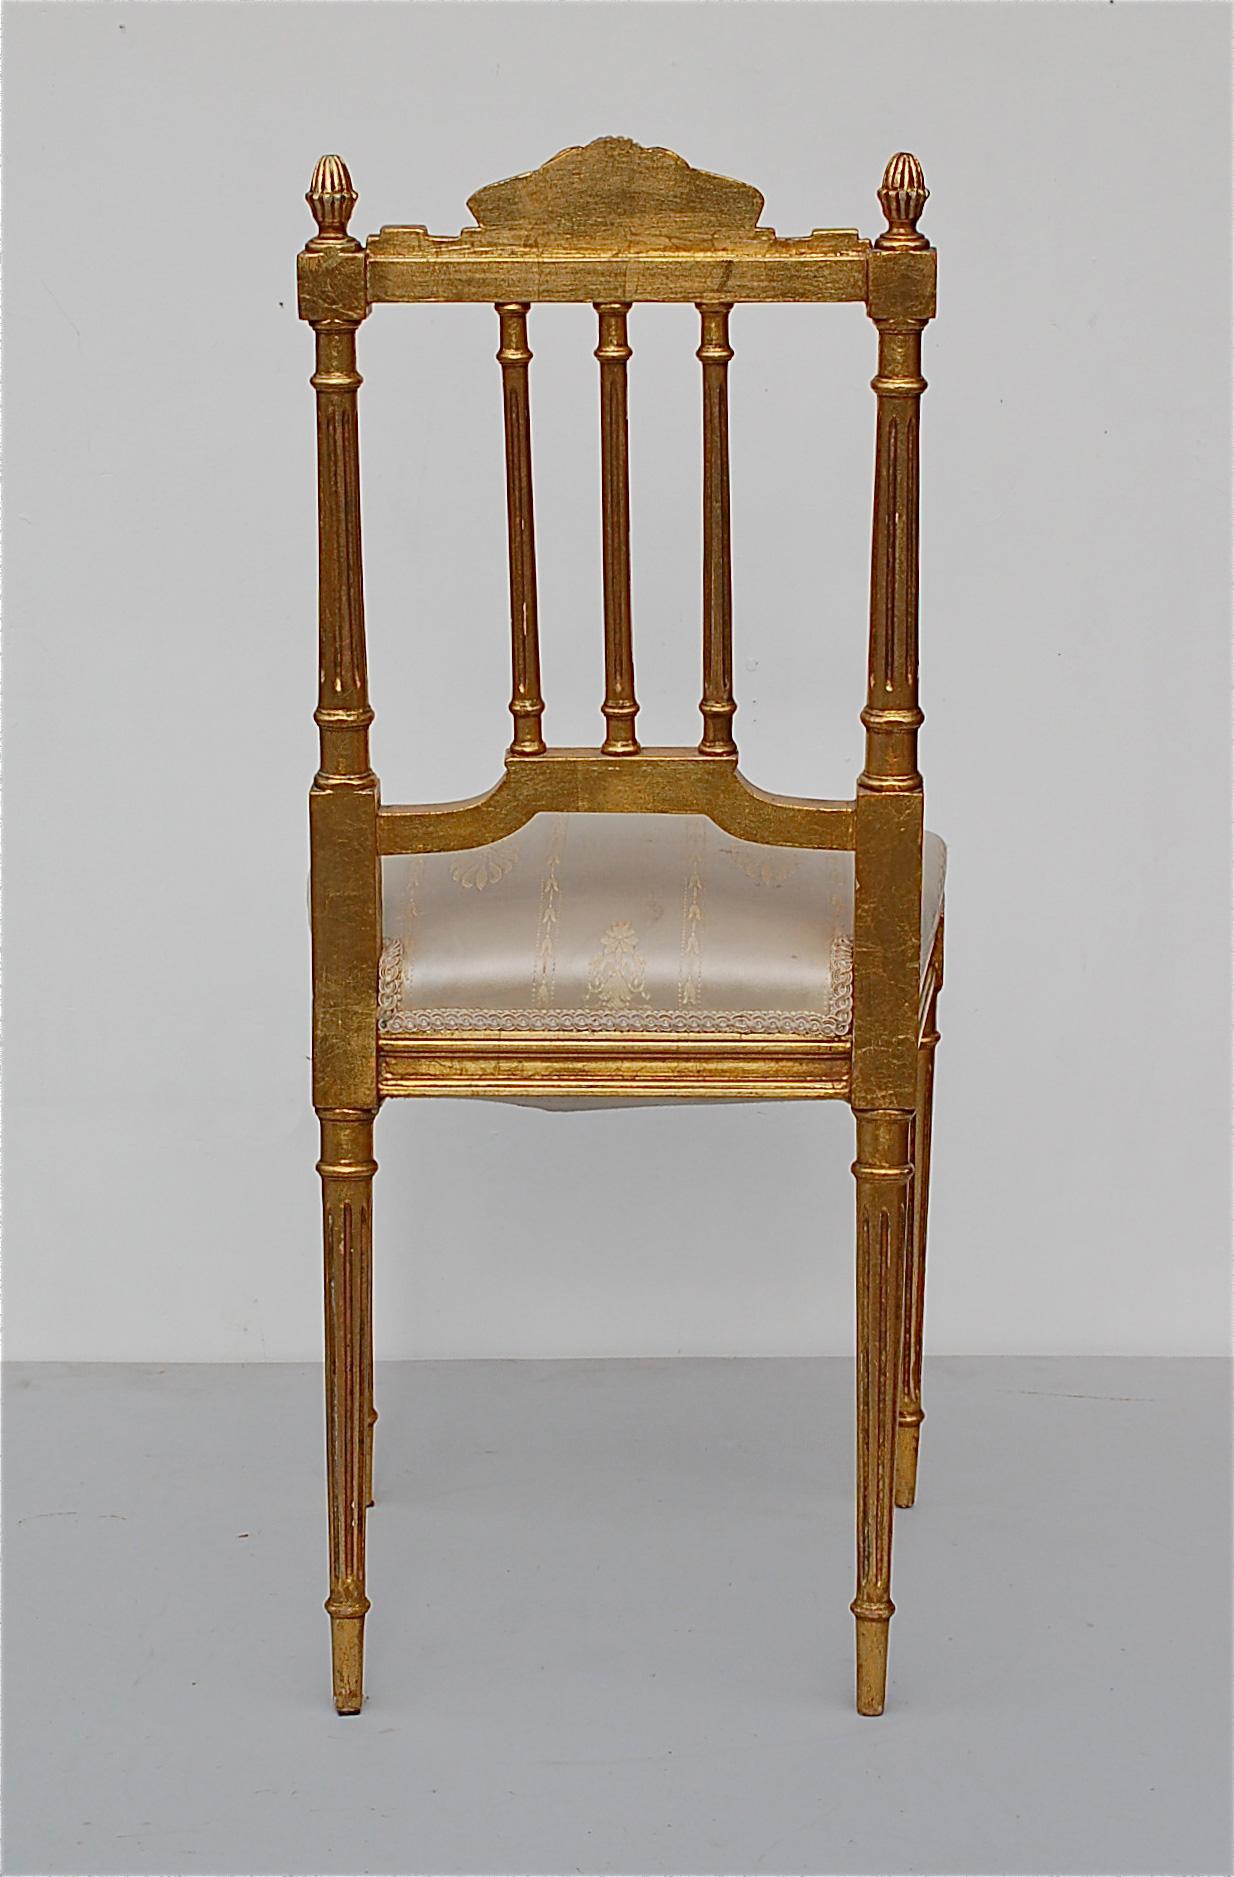 Neoclassical French Empire Style Giltwood Chair, Early 20th Century, France